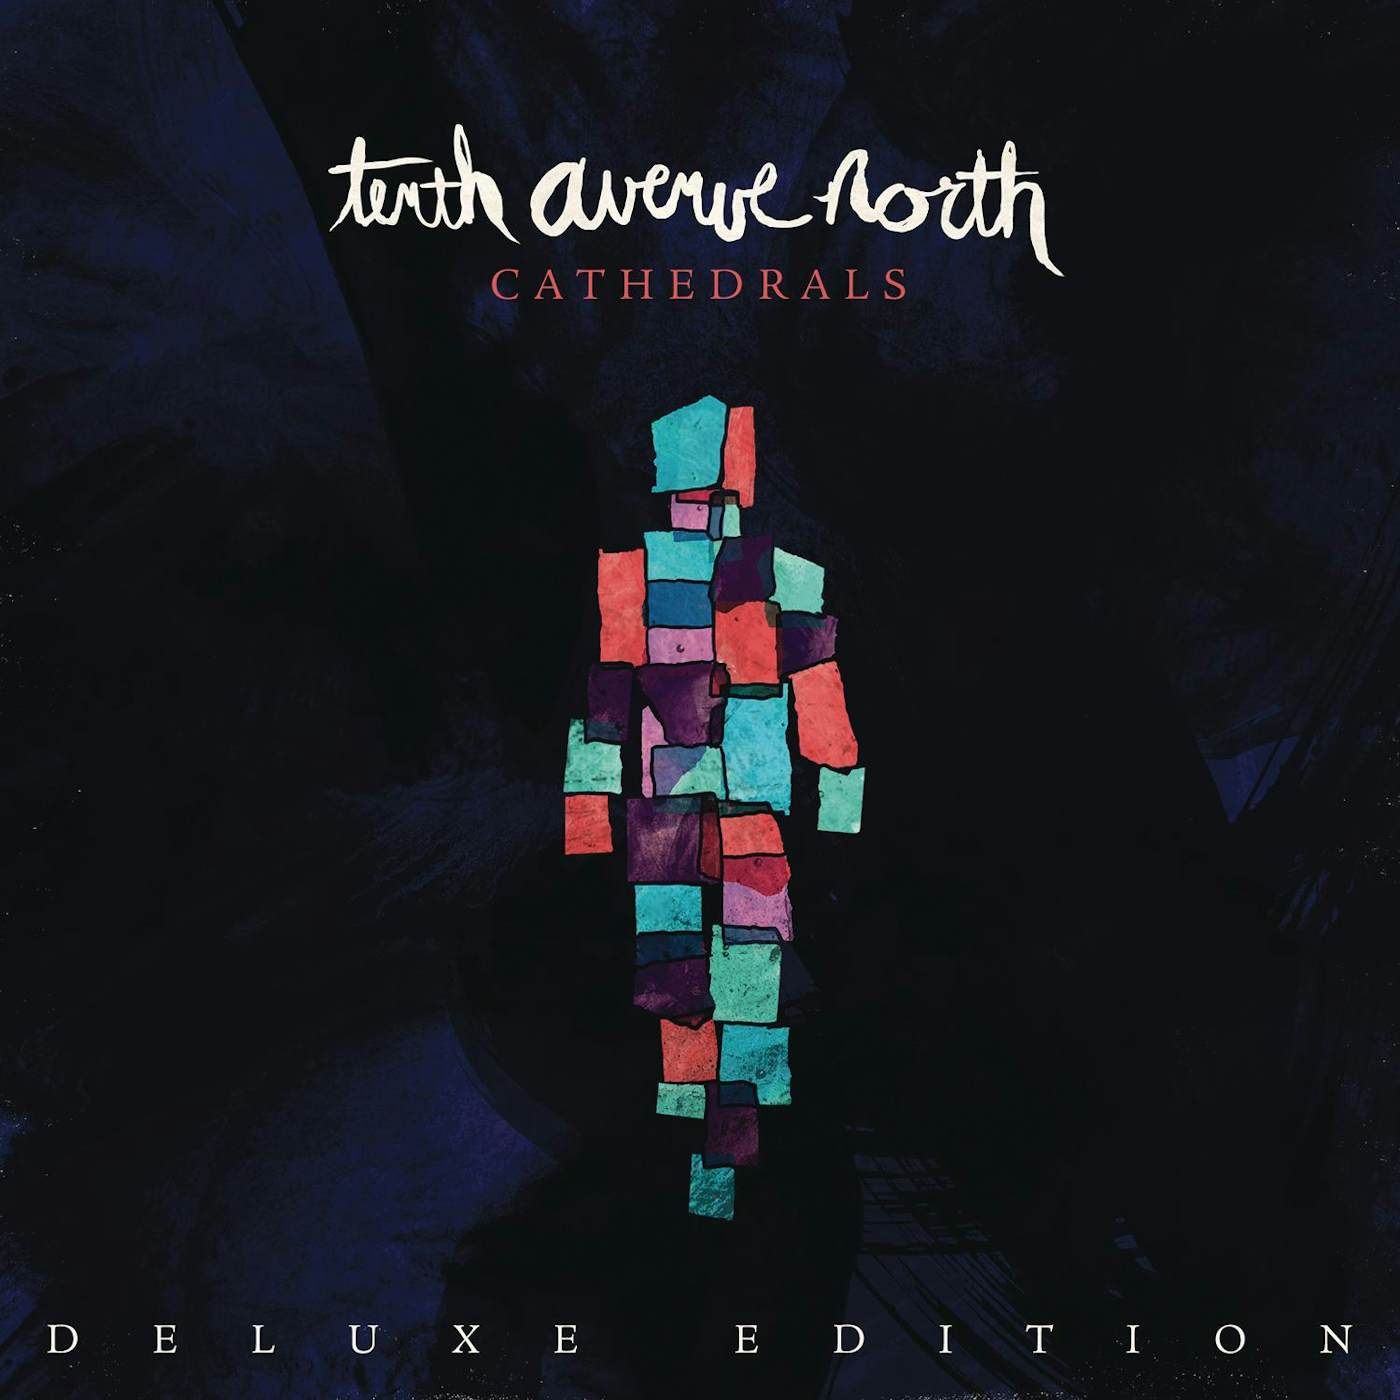 Tenth Avenue North CATHEDRALS CD